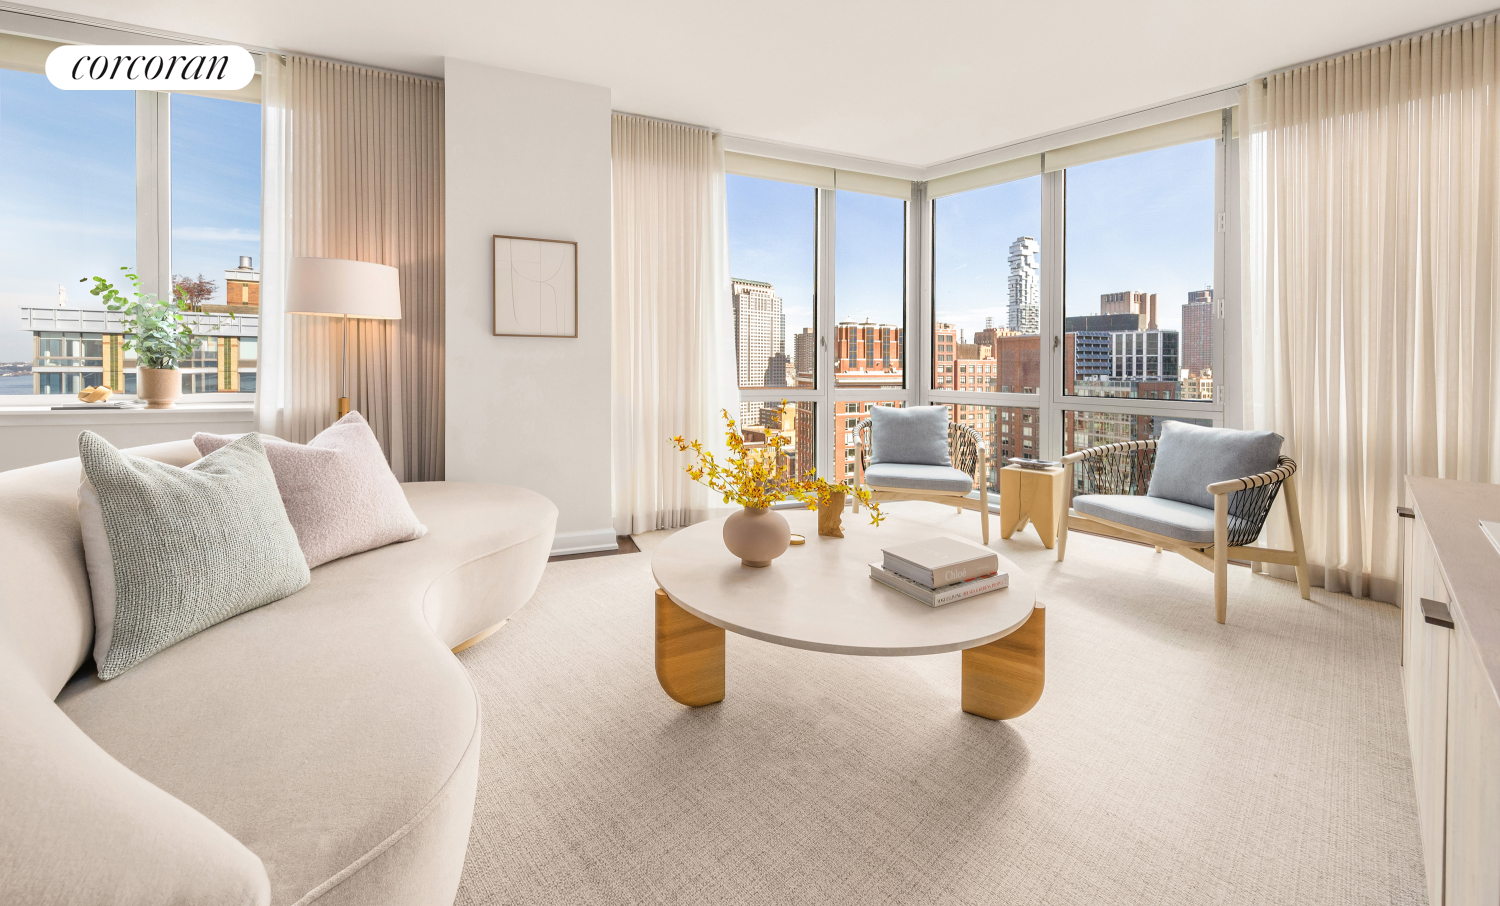 20 River Terrace Pha, Battery Park City, Downtown, NYC - 3 Bedrooms  
3 Bathrooms  
6 Rooms - 